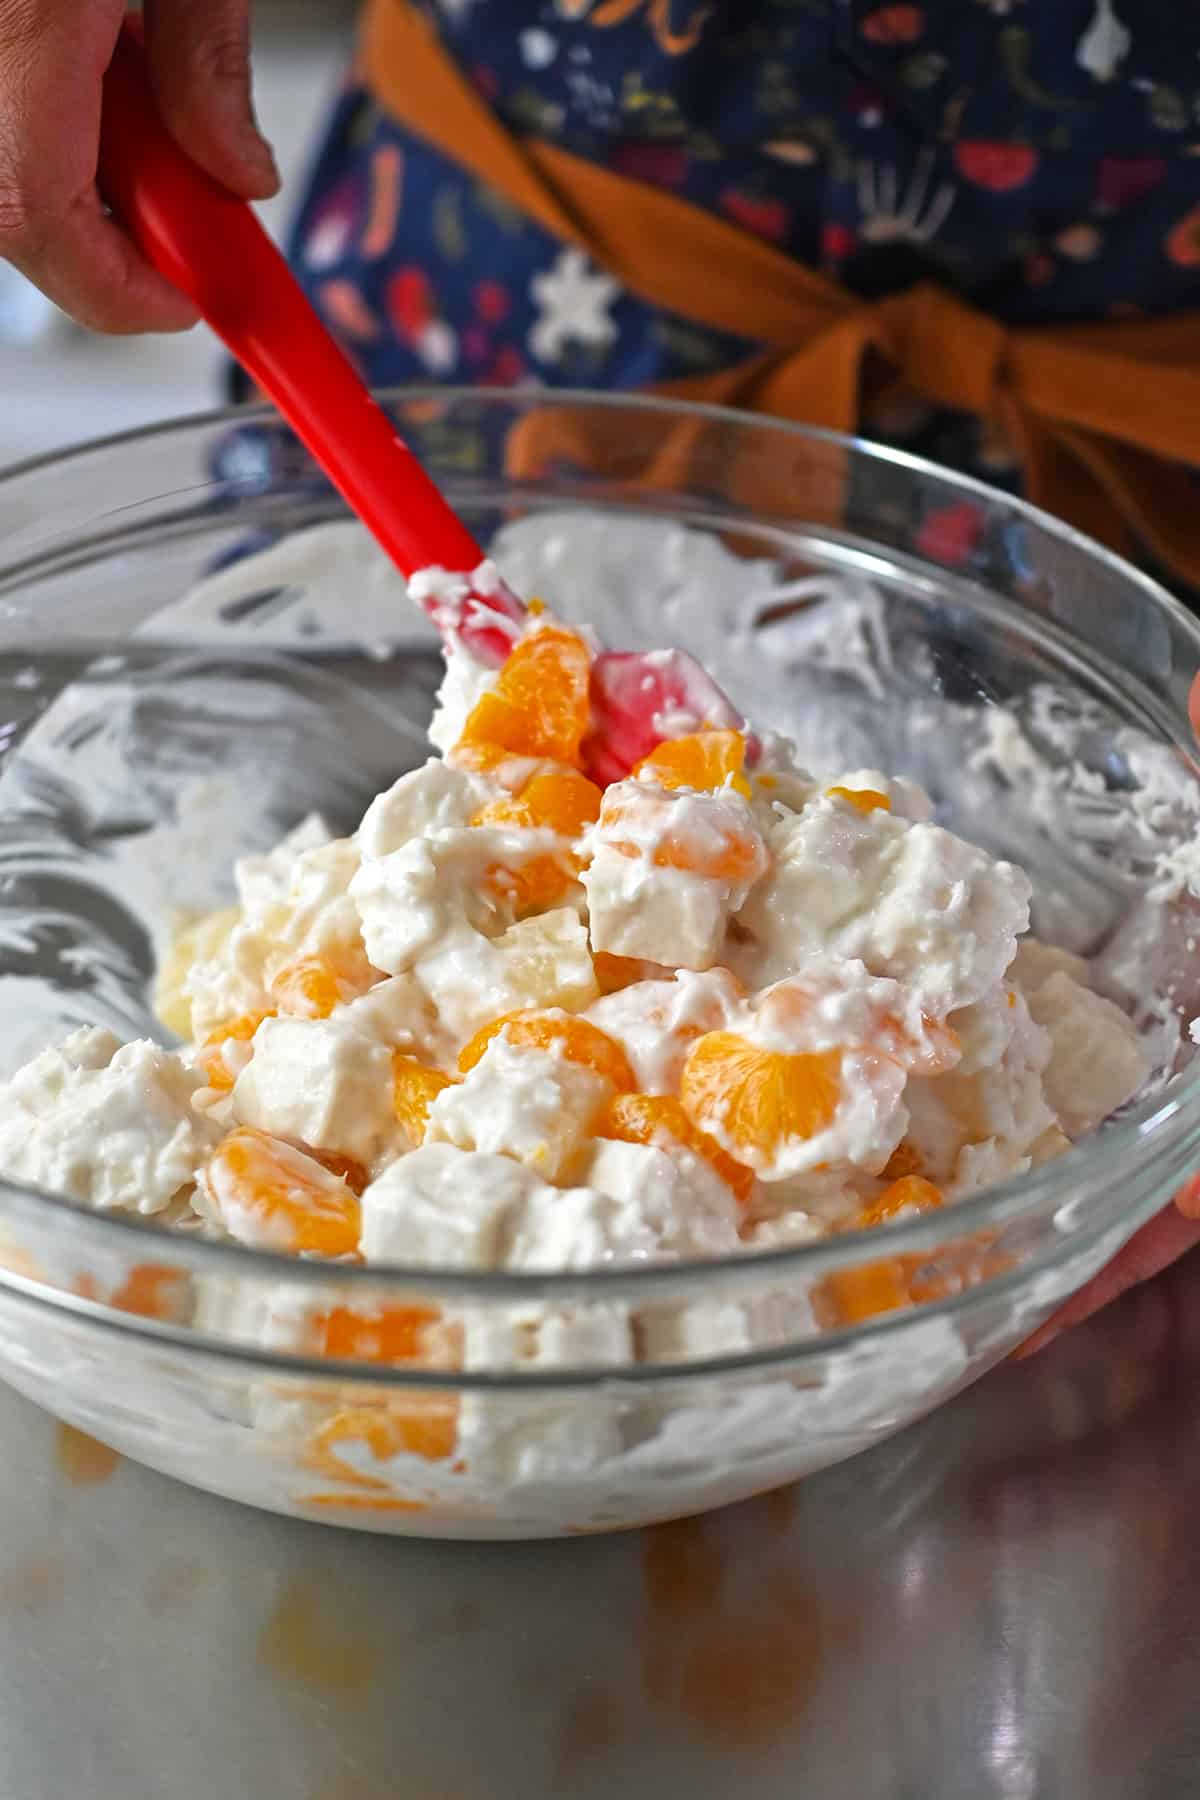 Mixing ambrosia salad in a large glas bowl with a red silicone spatula.